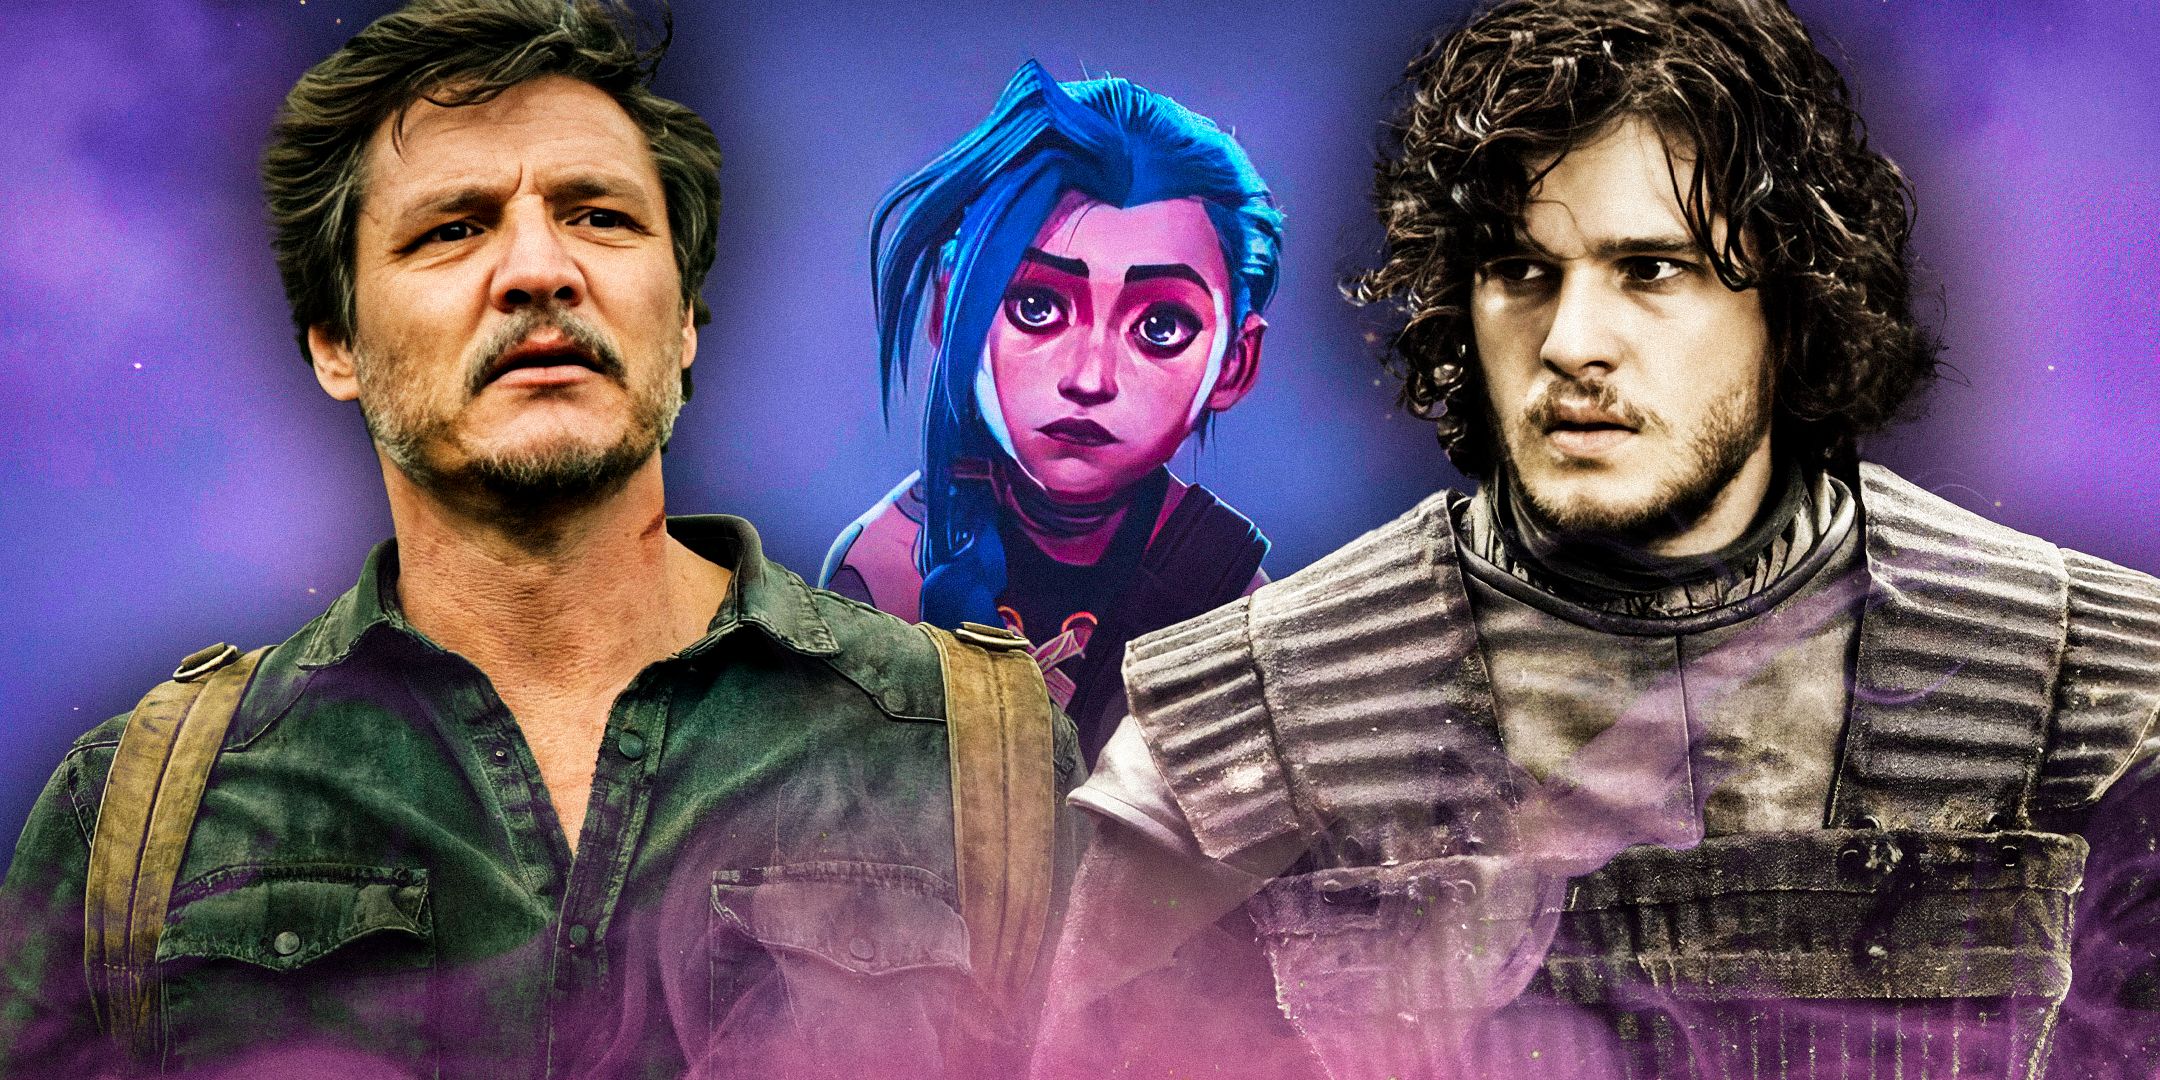 Kit-Harington-as-Jon-Snow-from-Game-of-Thrones-and-Pedro-Pascal-as-Joel-Miller-from-The-Last-of-Us-